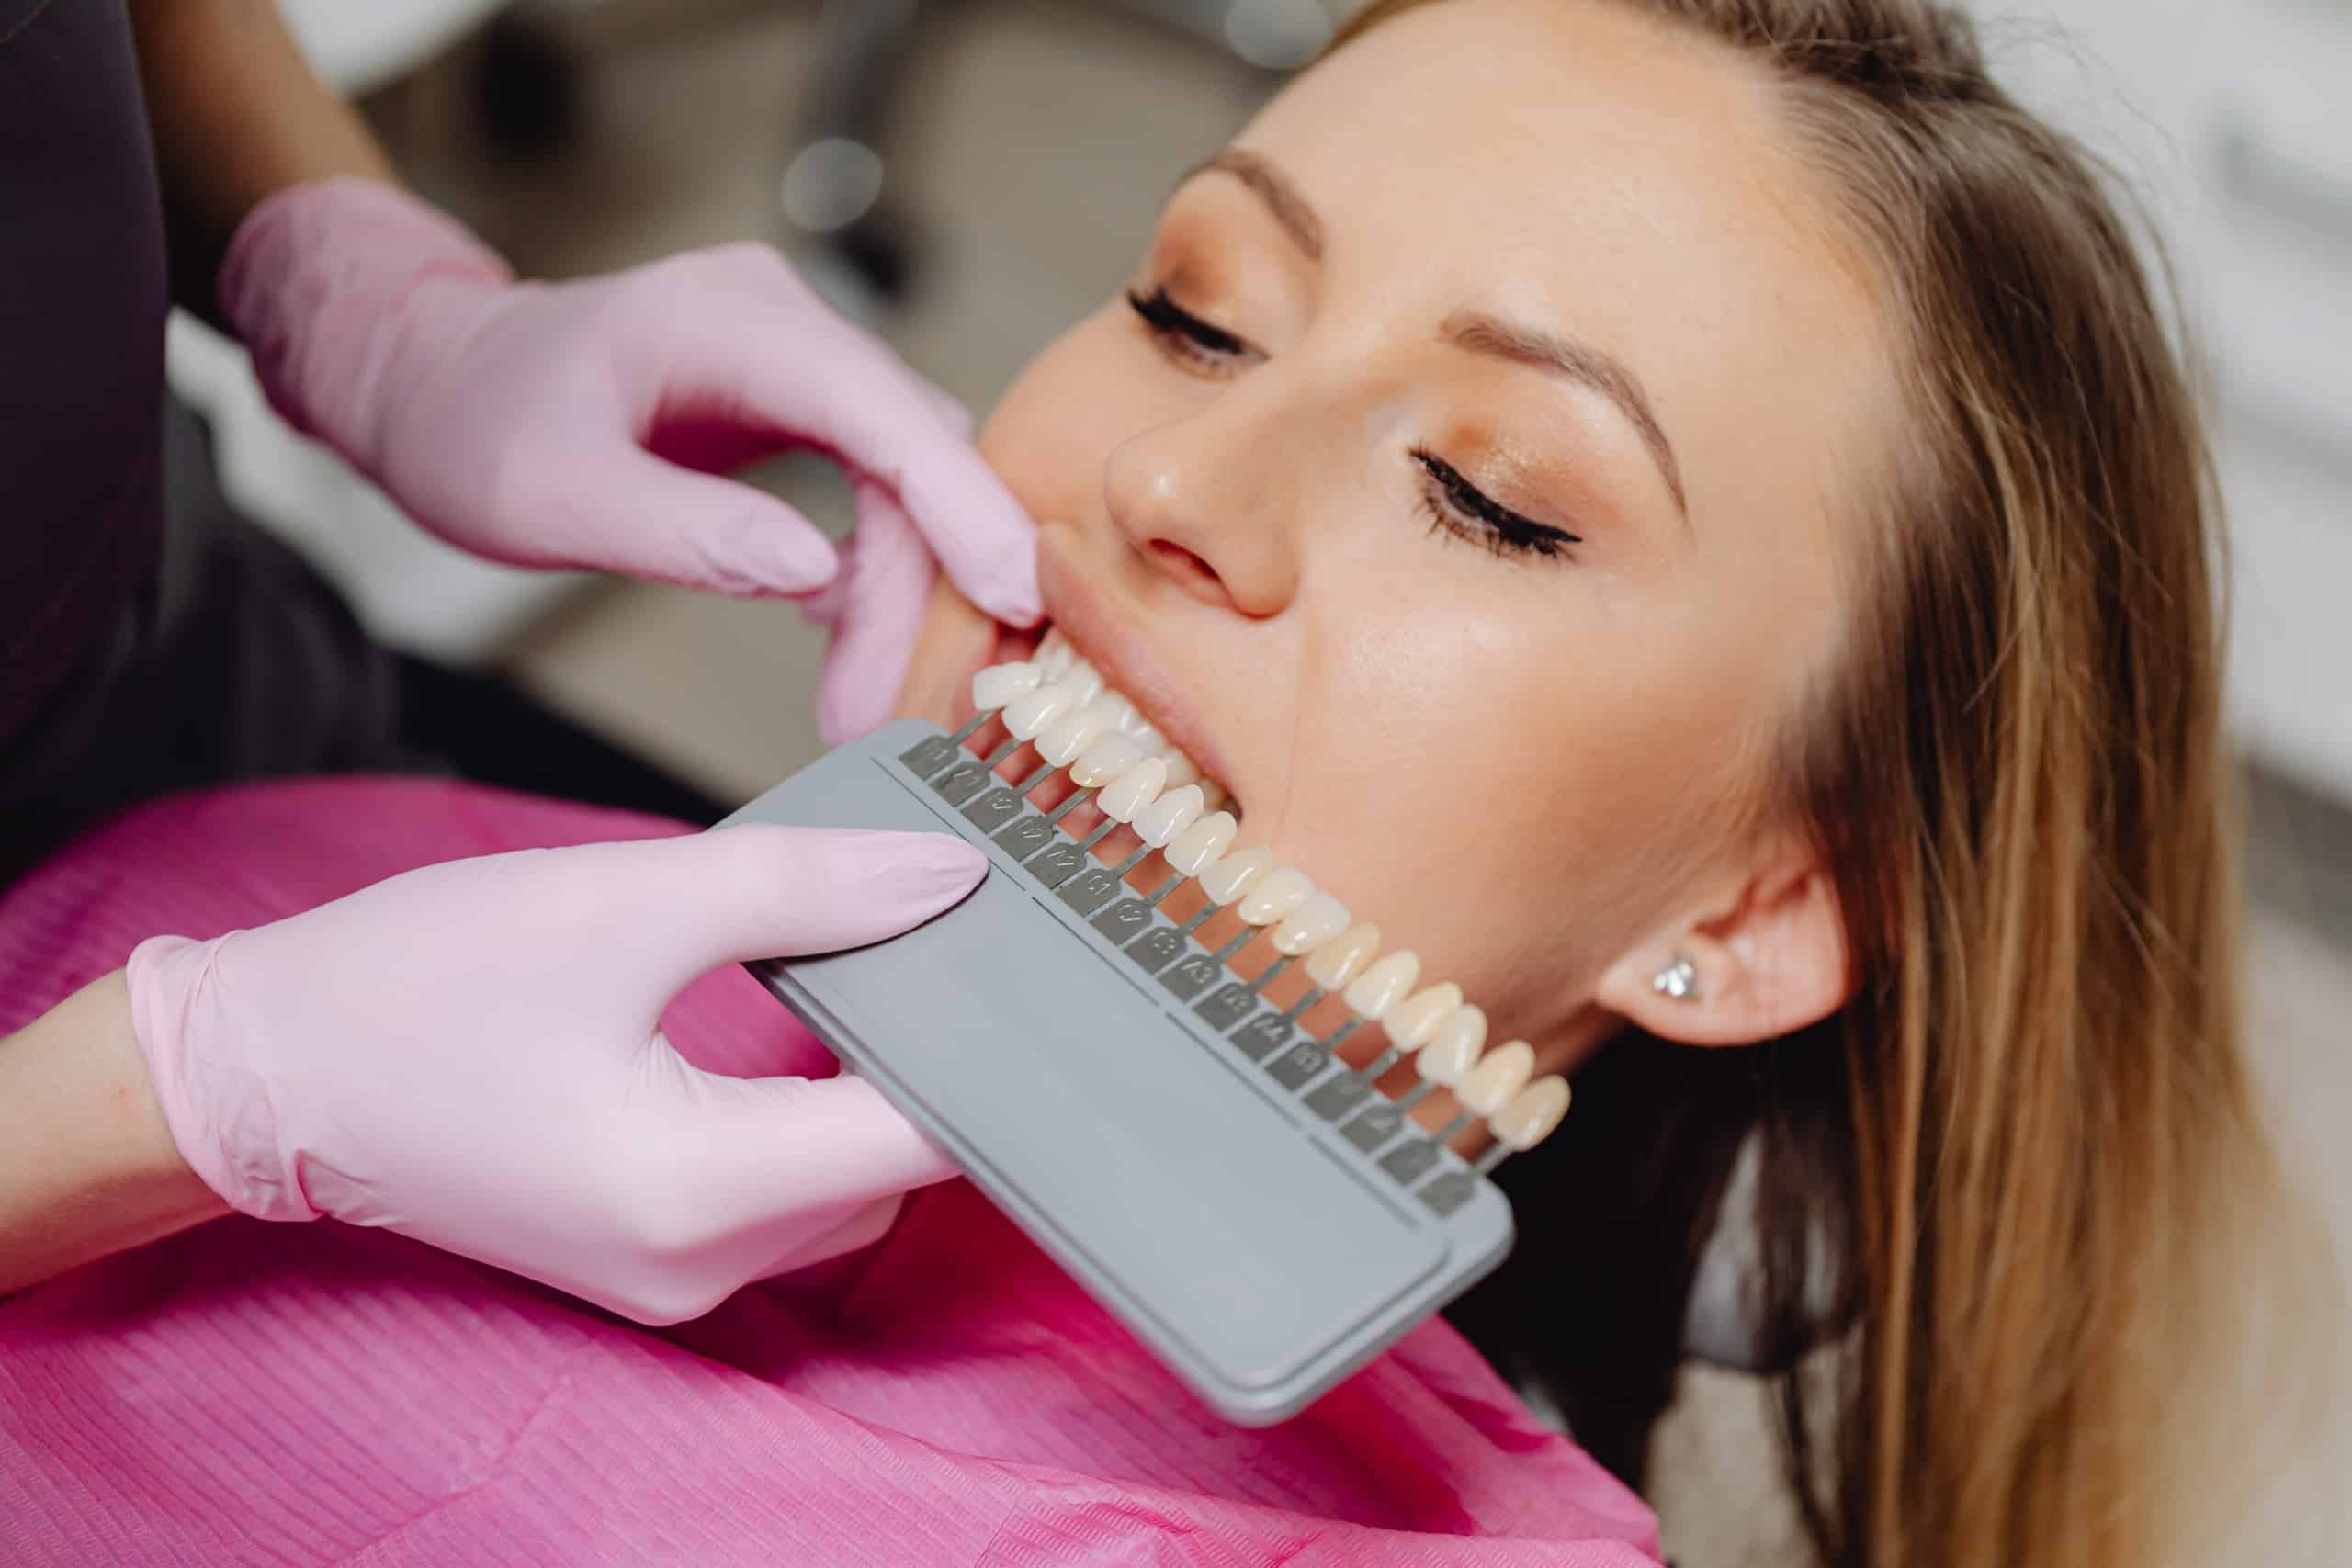 Liverpool dentist: When Are Veneers Recommended?